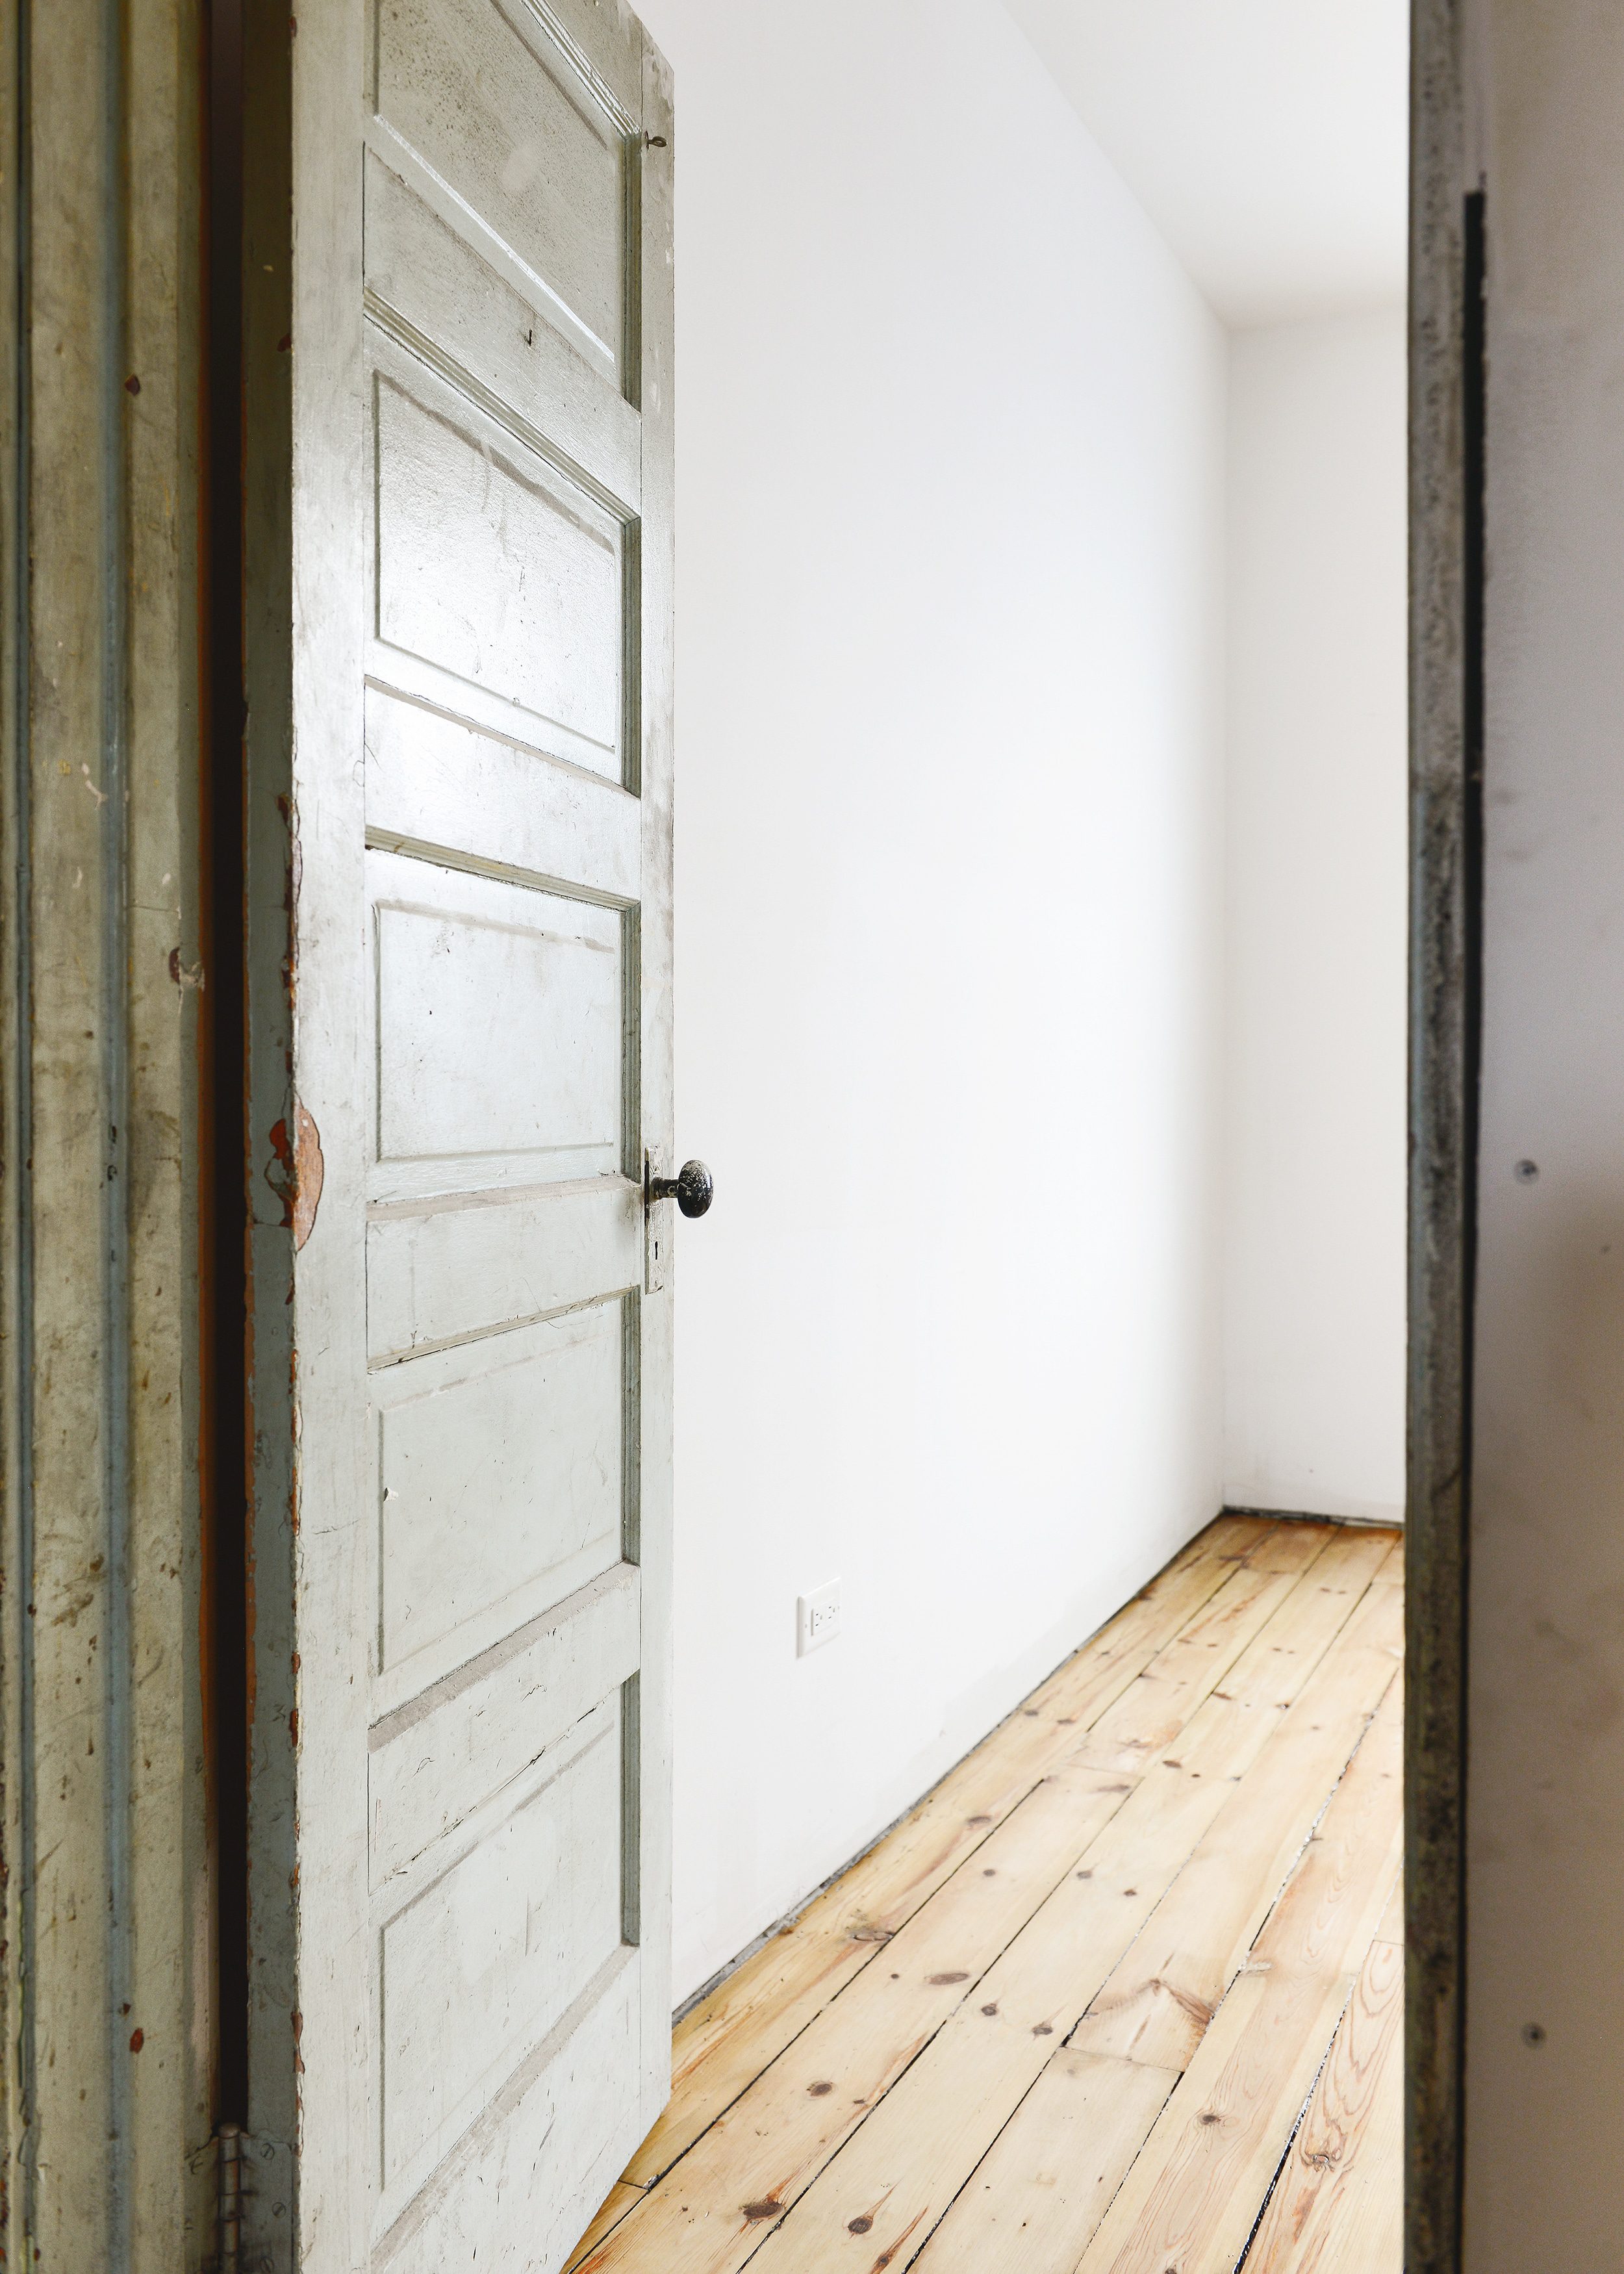 A vintage door opens into a white bedroom with refinished wide plank pine flooring // via Yellow Brick Home